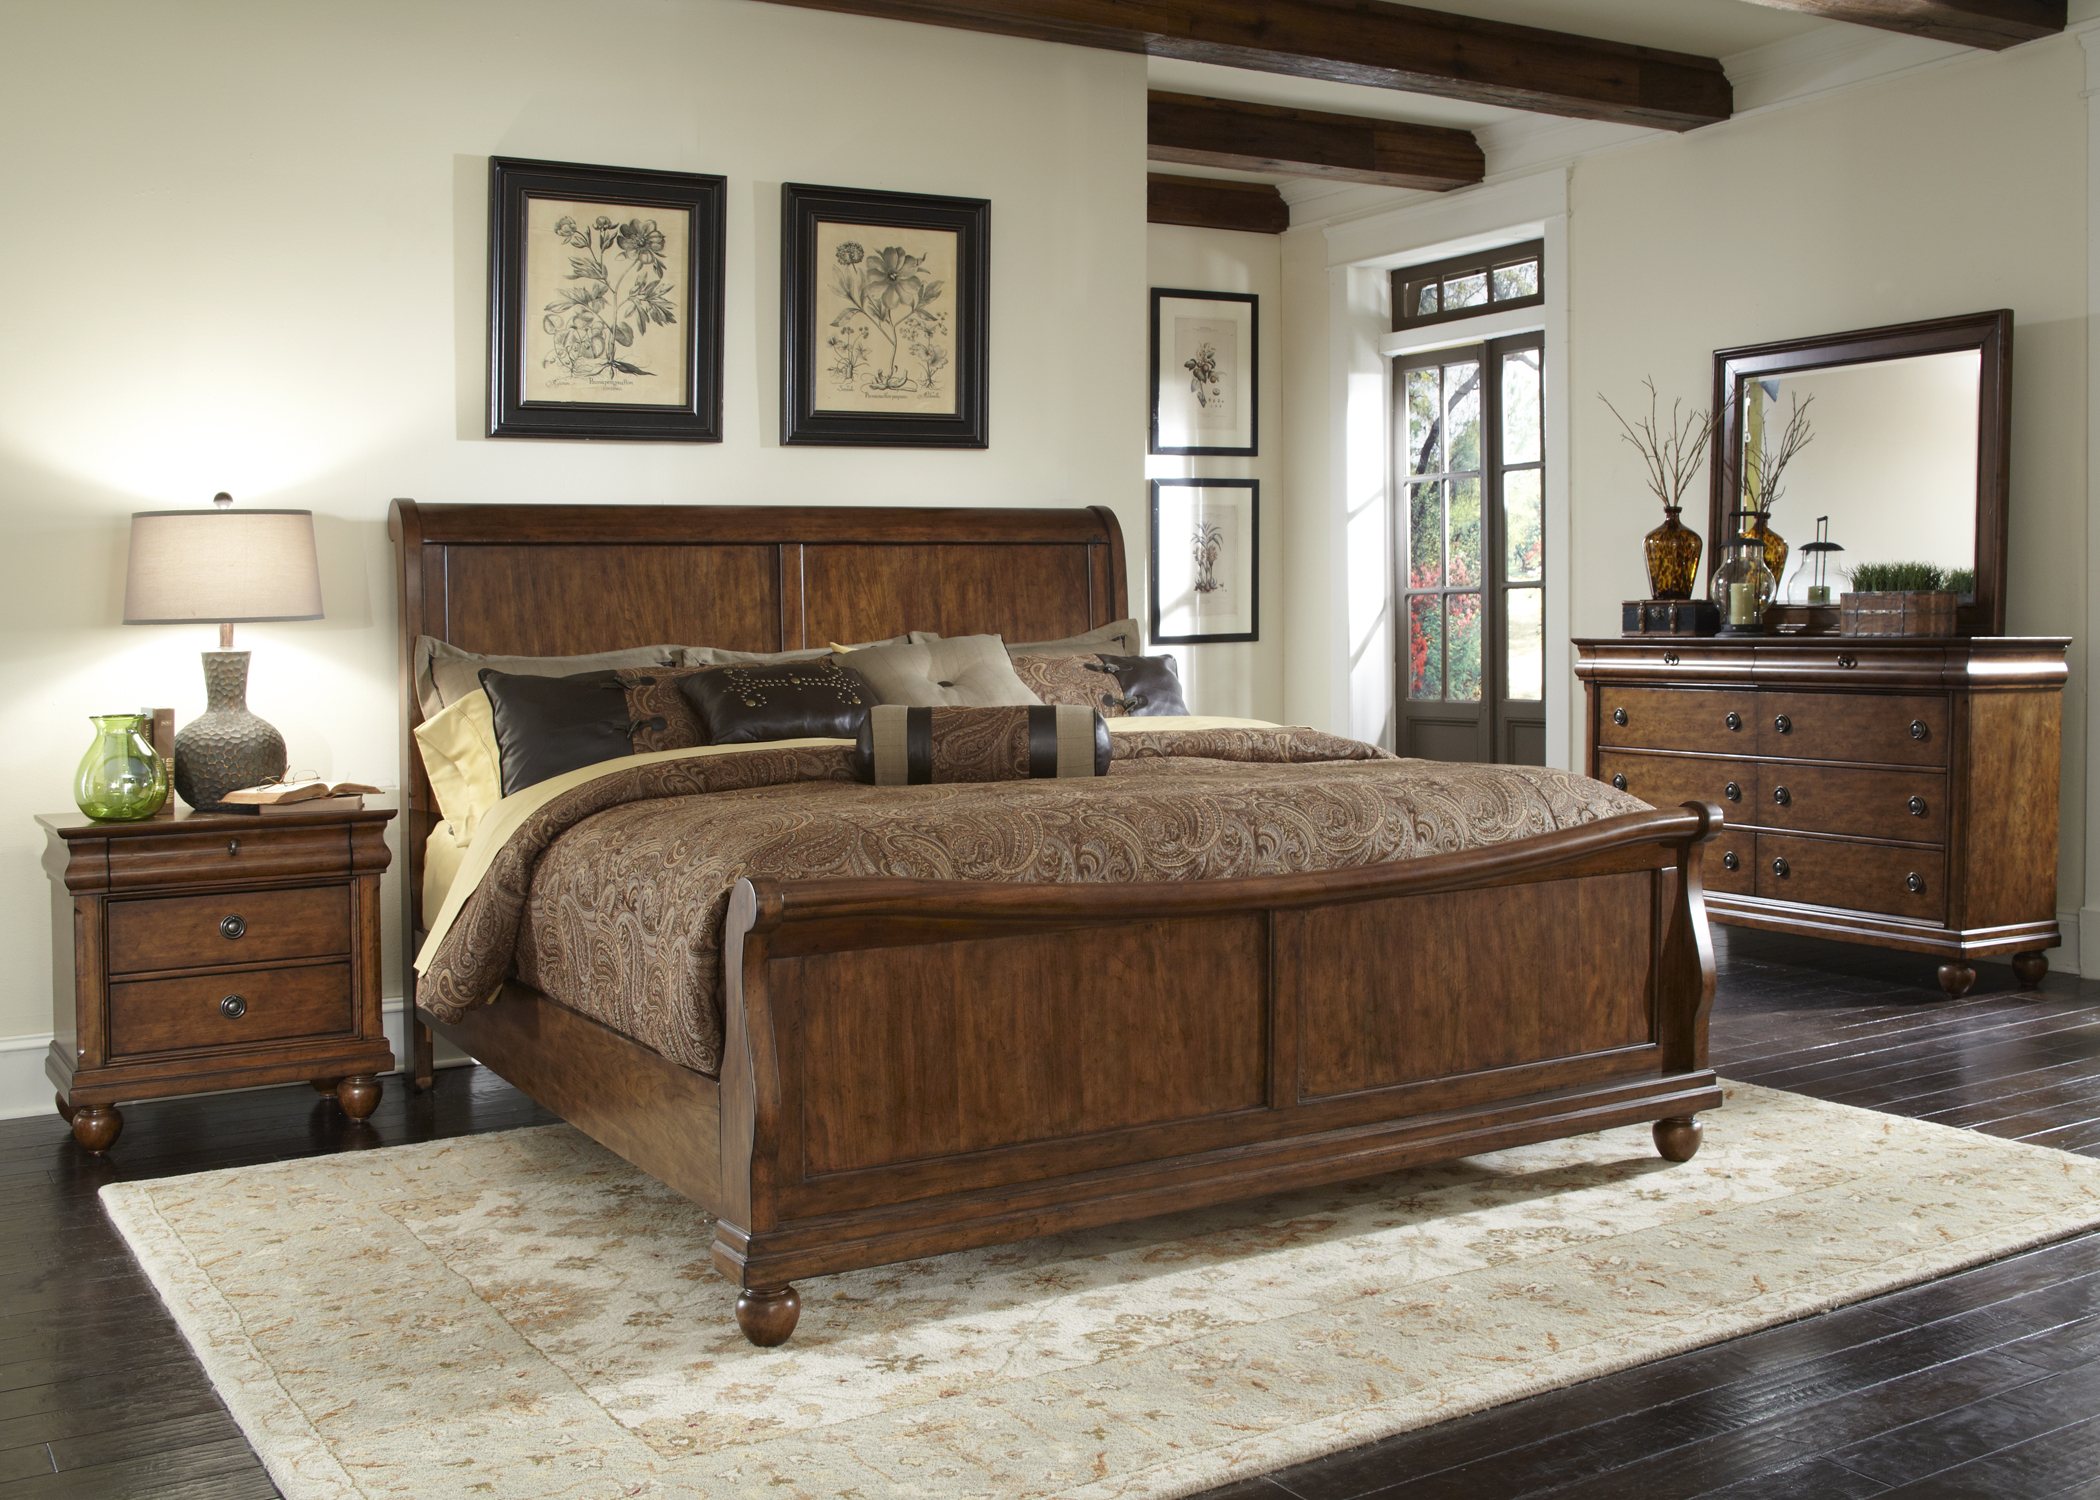 Liberty Furniture Rustic Traditions Bedroom King Sleigh Bed, Dresser, Mirror, Chest and Night Stand Collection